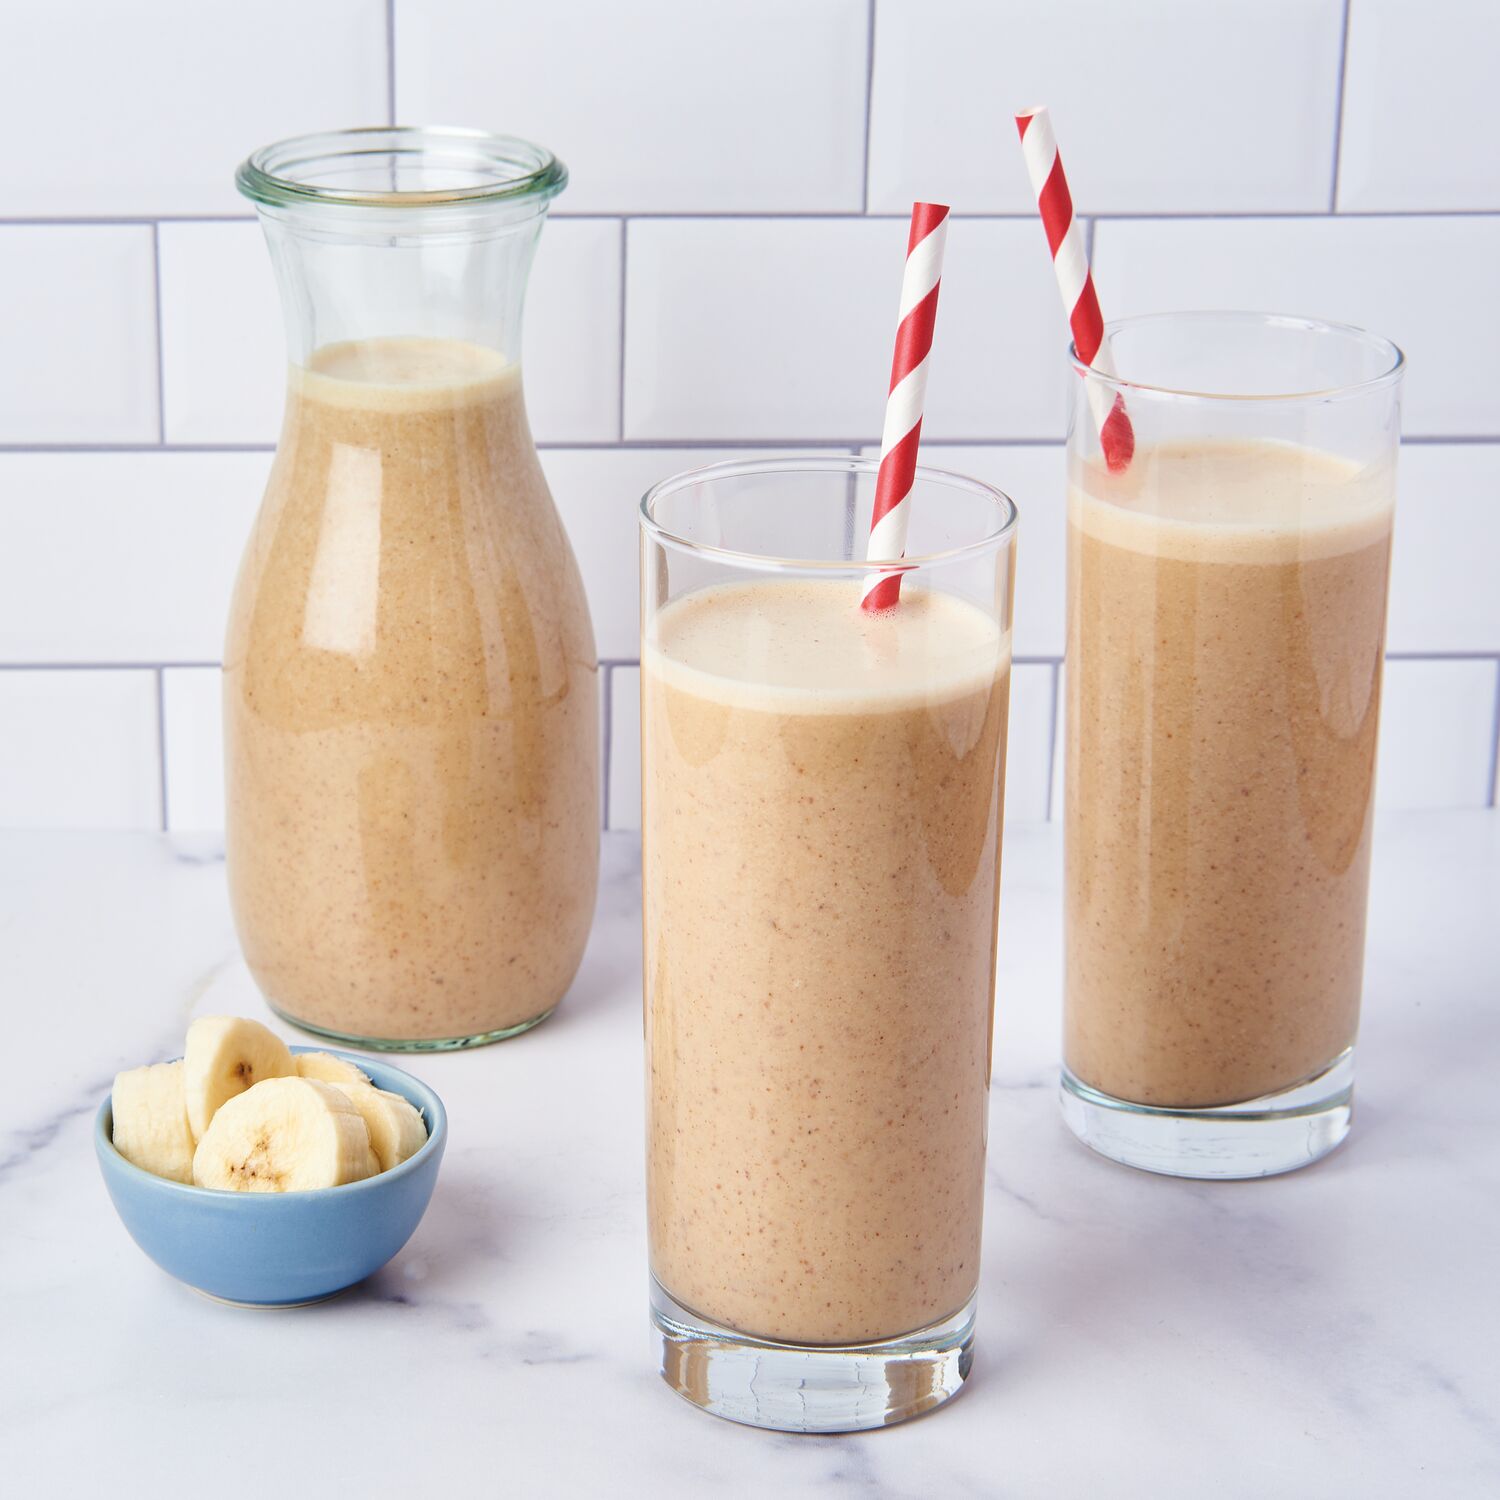 Banana Date Spread Smoothies